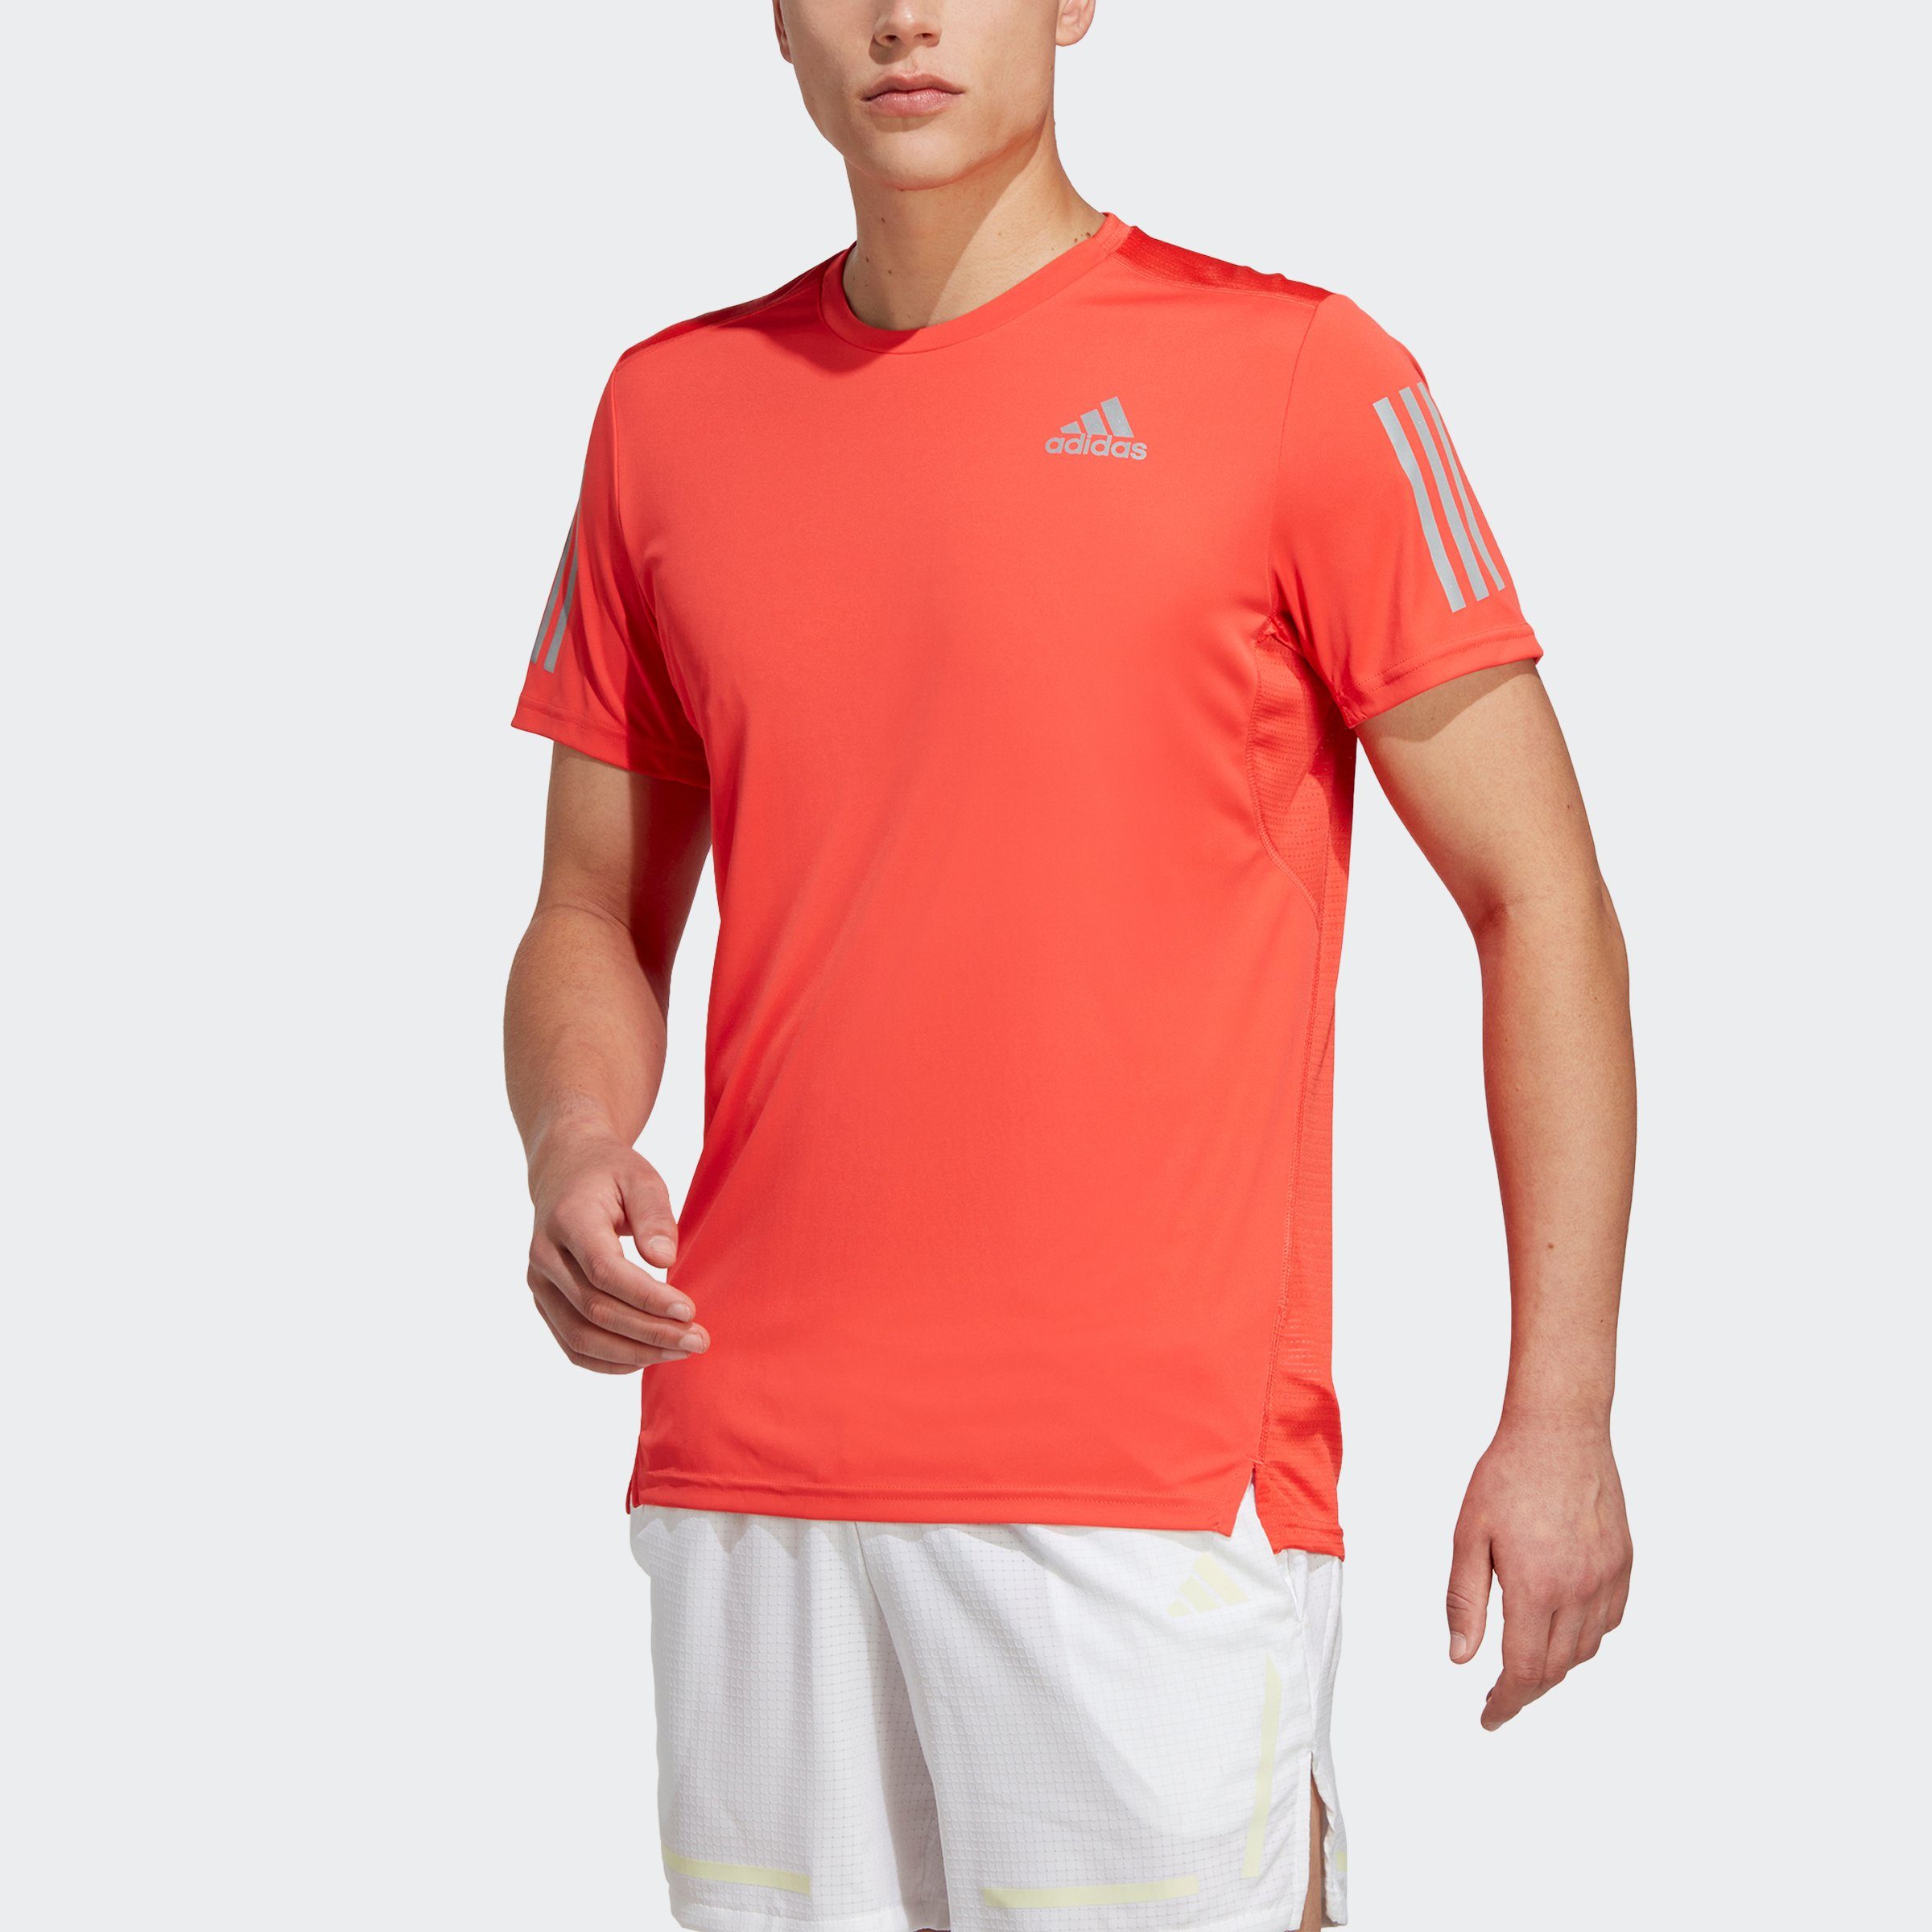 adidas Performance Laufshirt Red Reflective THE OWN Bright Silver RUN 